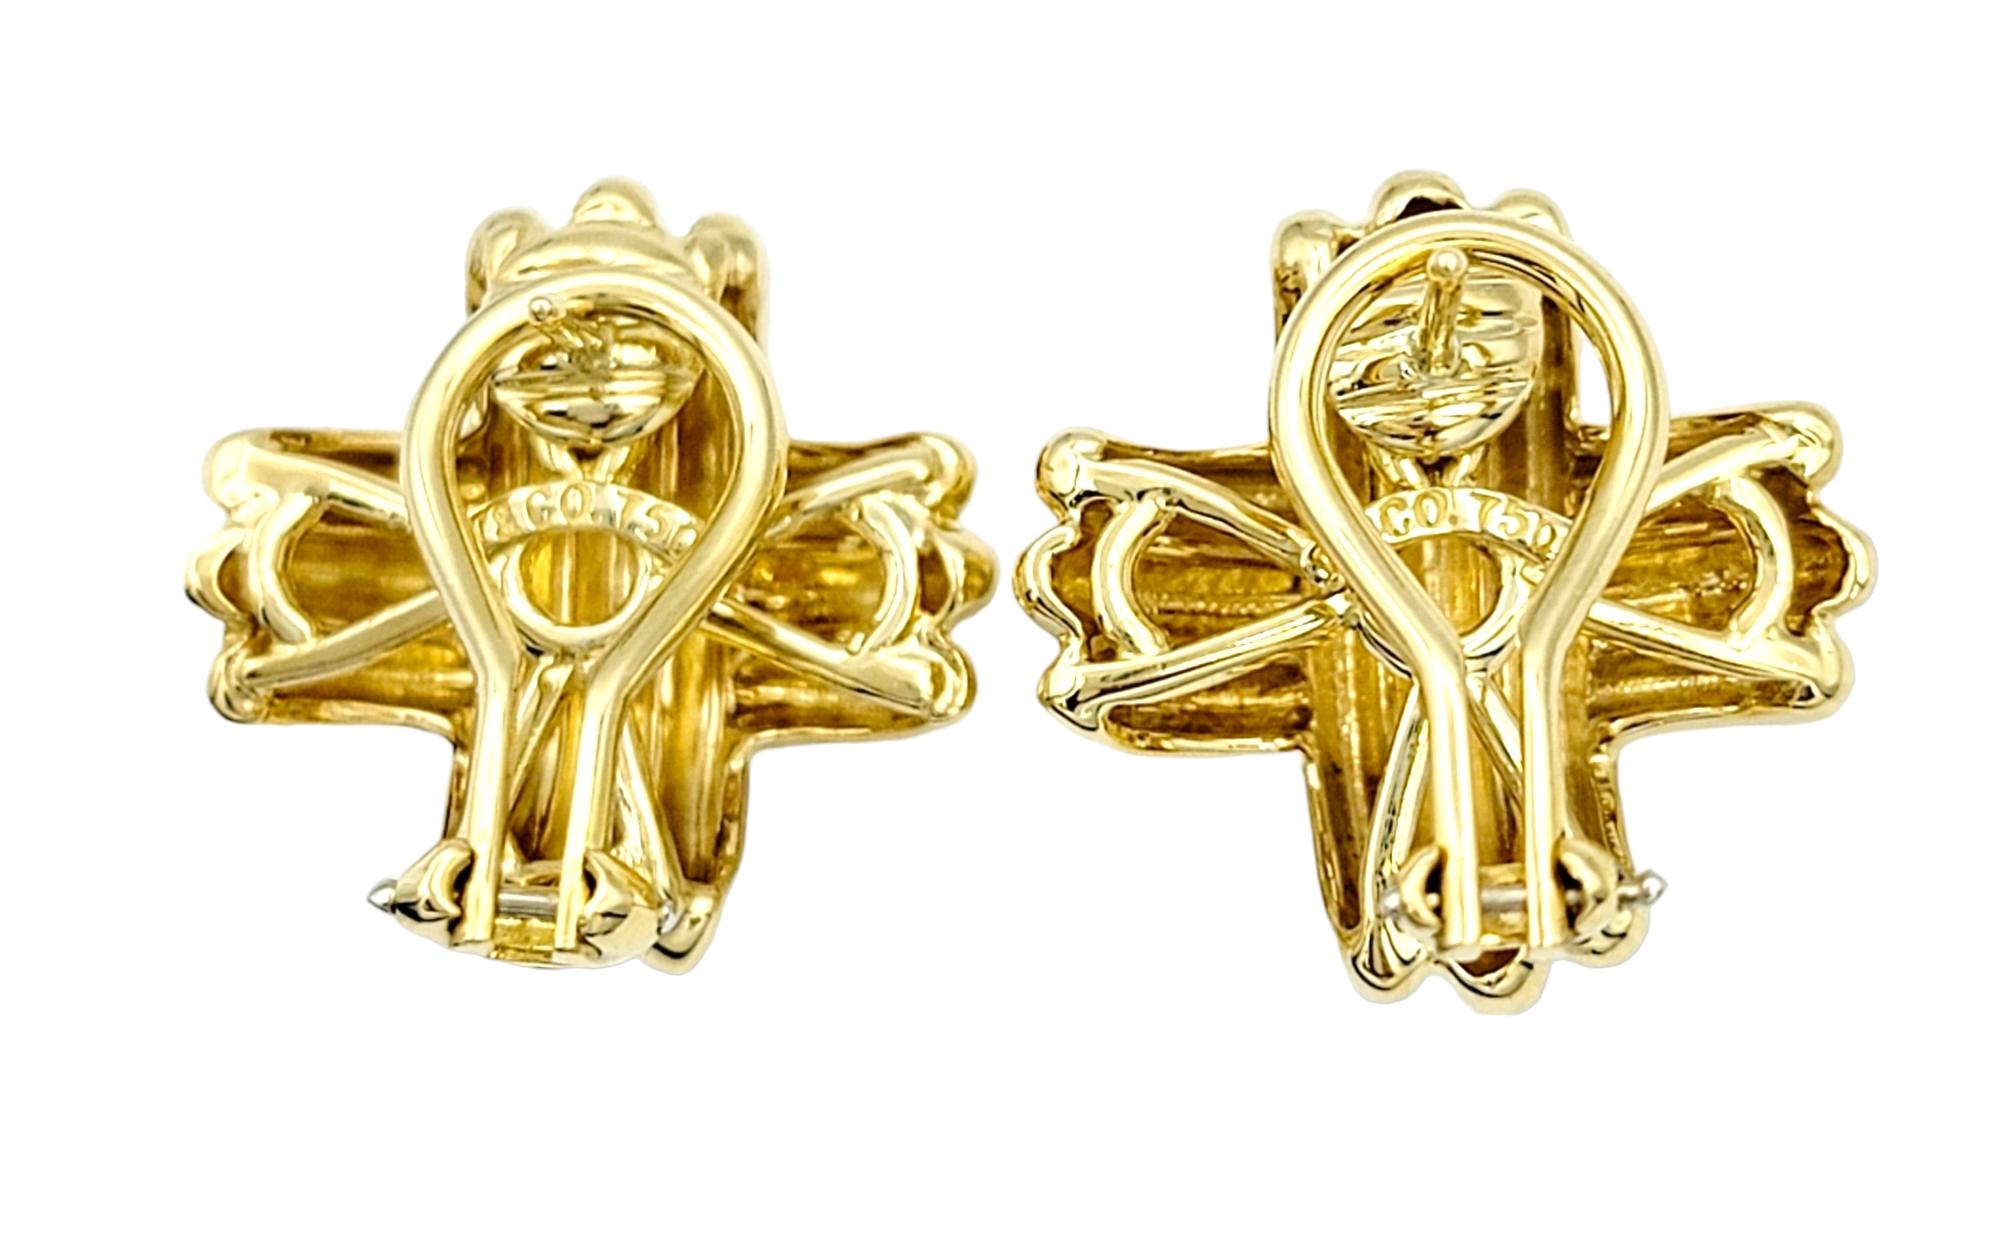 Contemporary Tiffany & Co. Signature 'X' Omega Back Stud Earrings in 18 Karat Yellow Gold